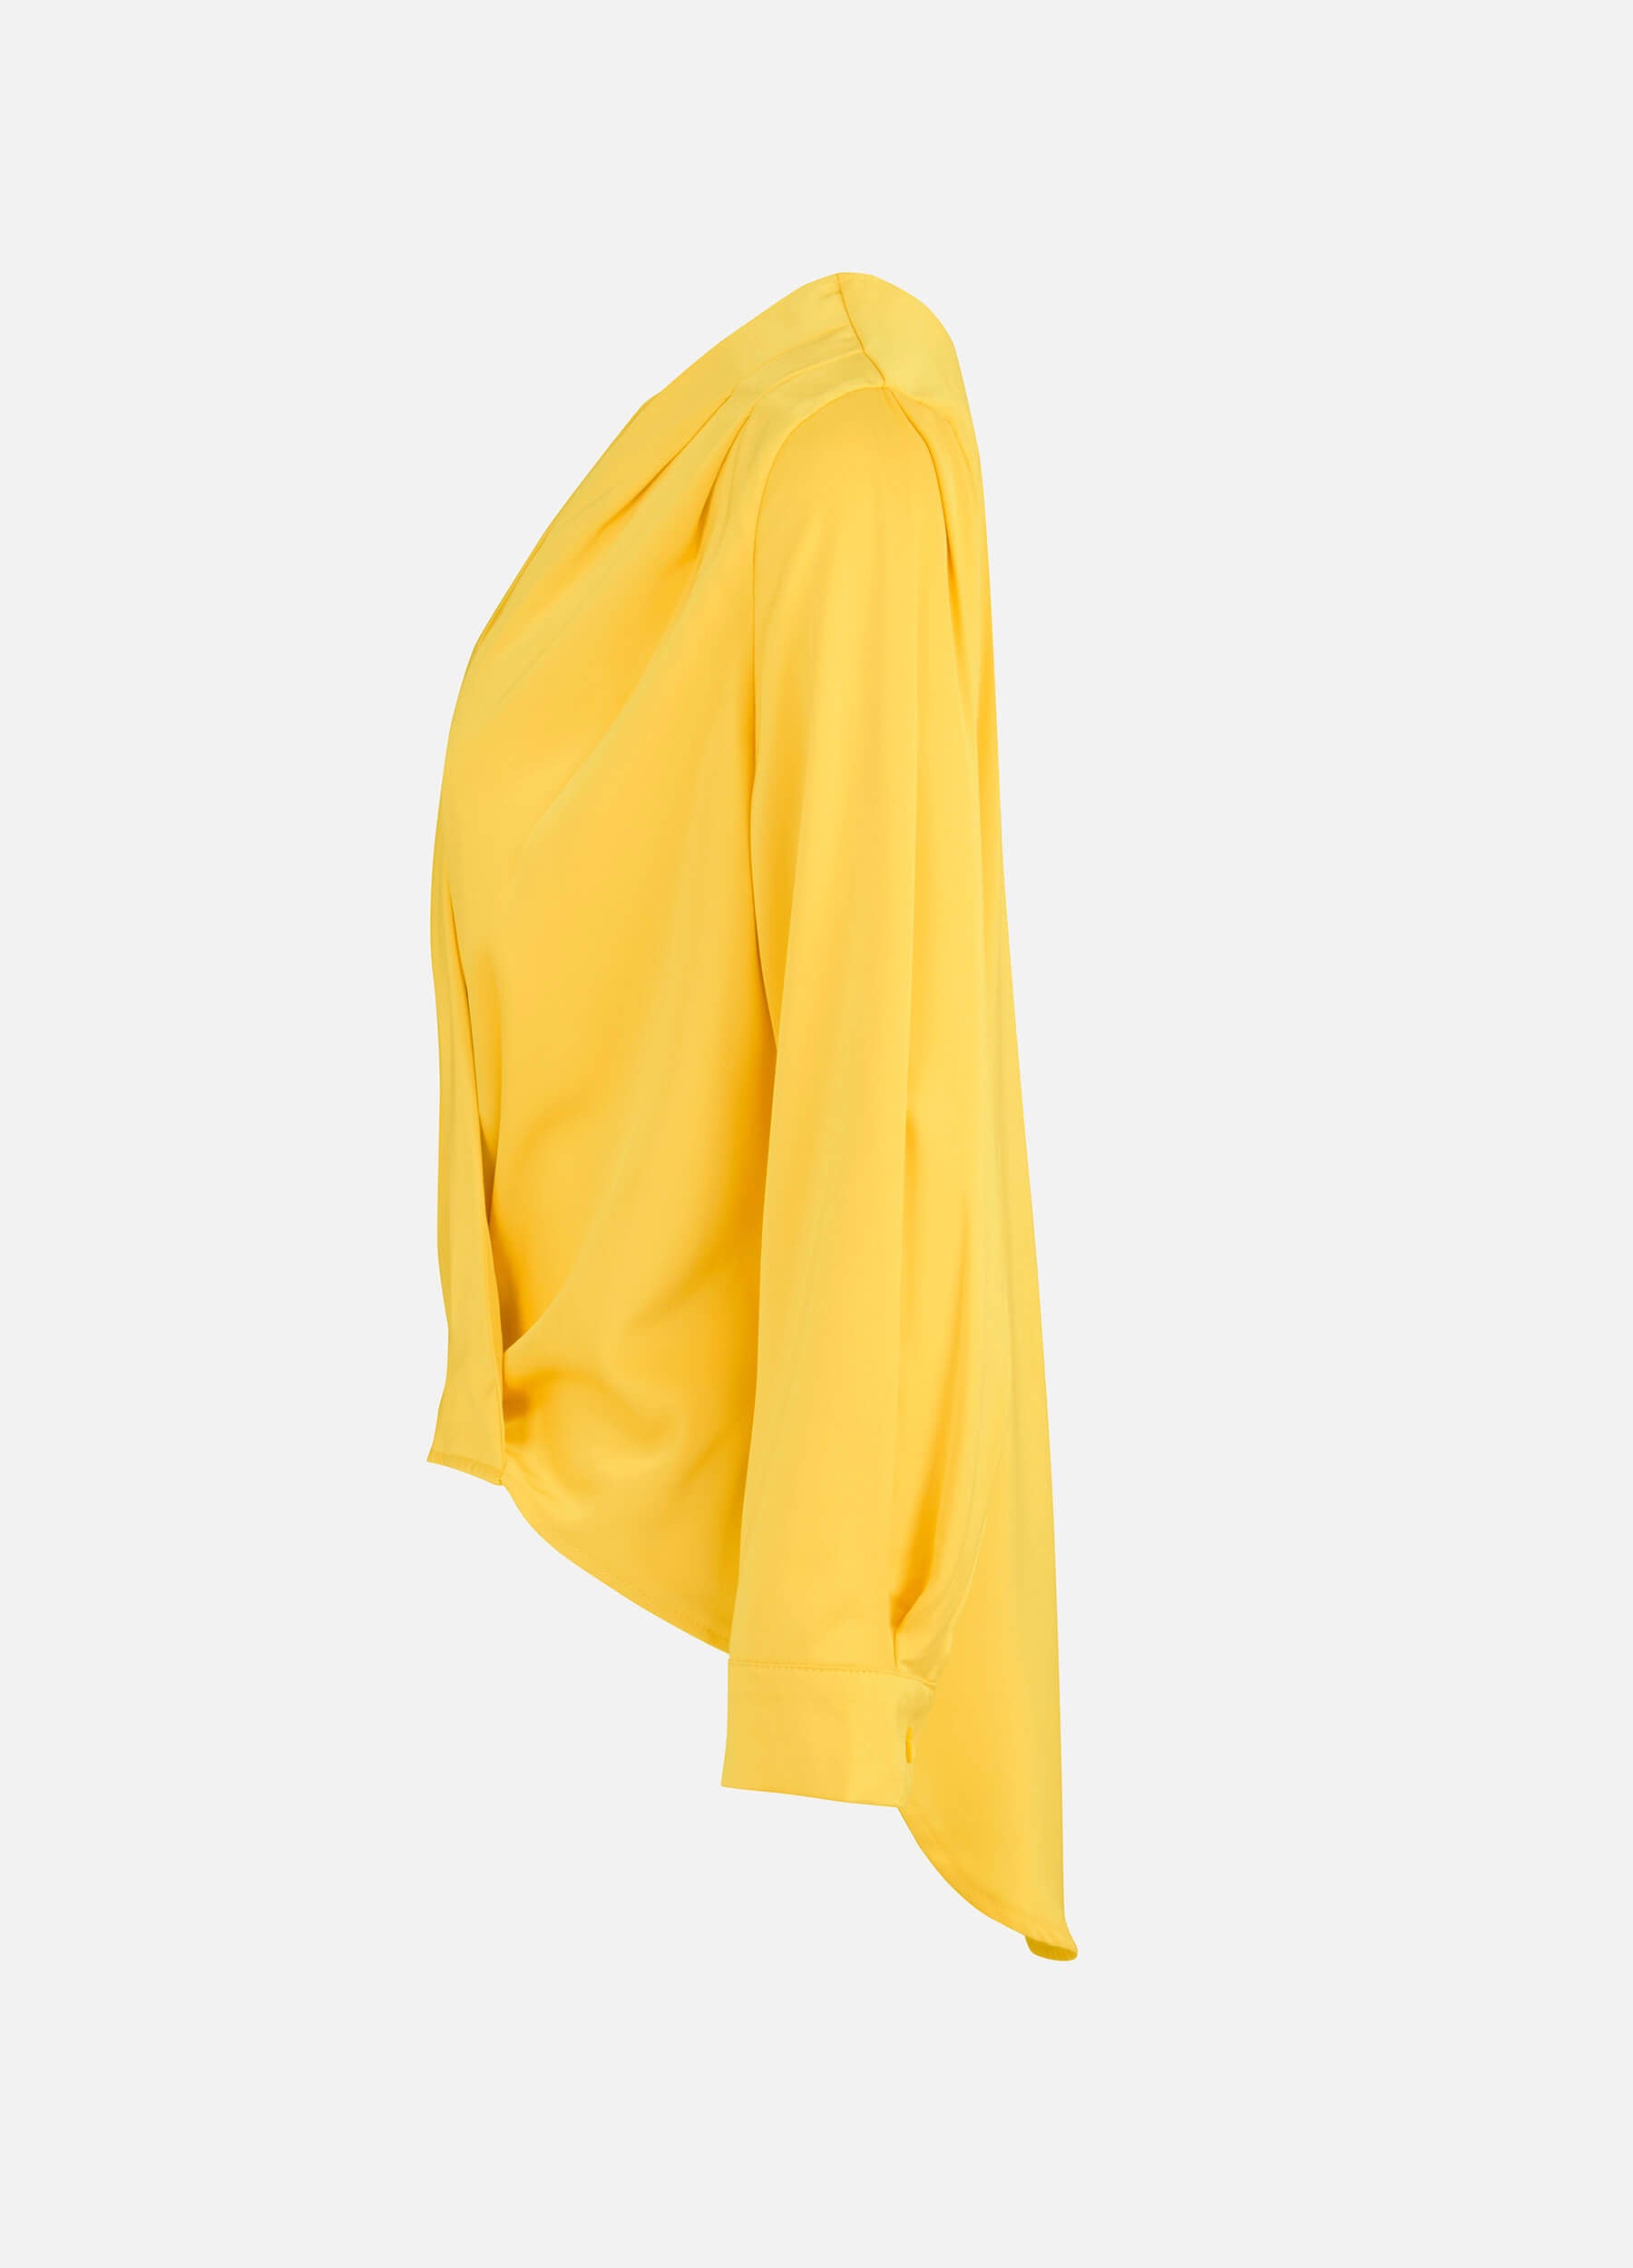 Women's Solid Surplice Neck Satin Top-Yellow side view